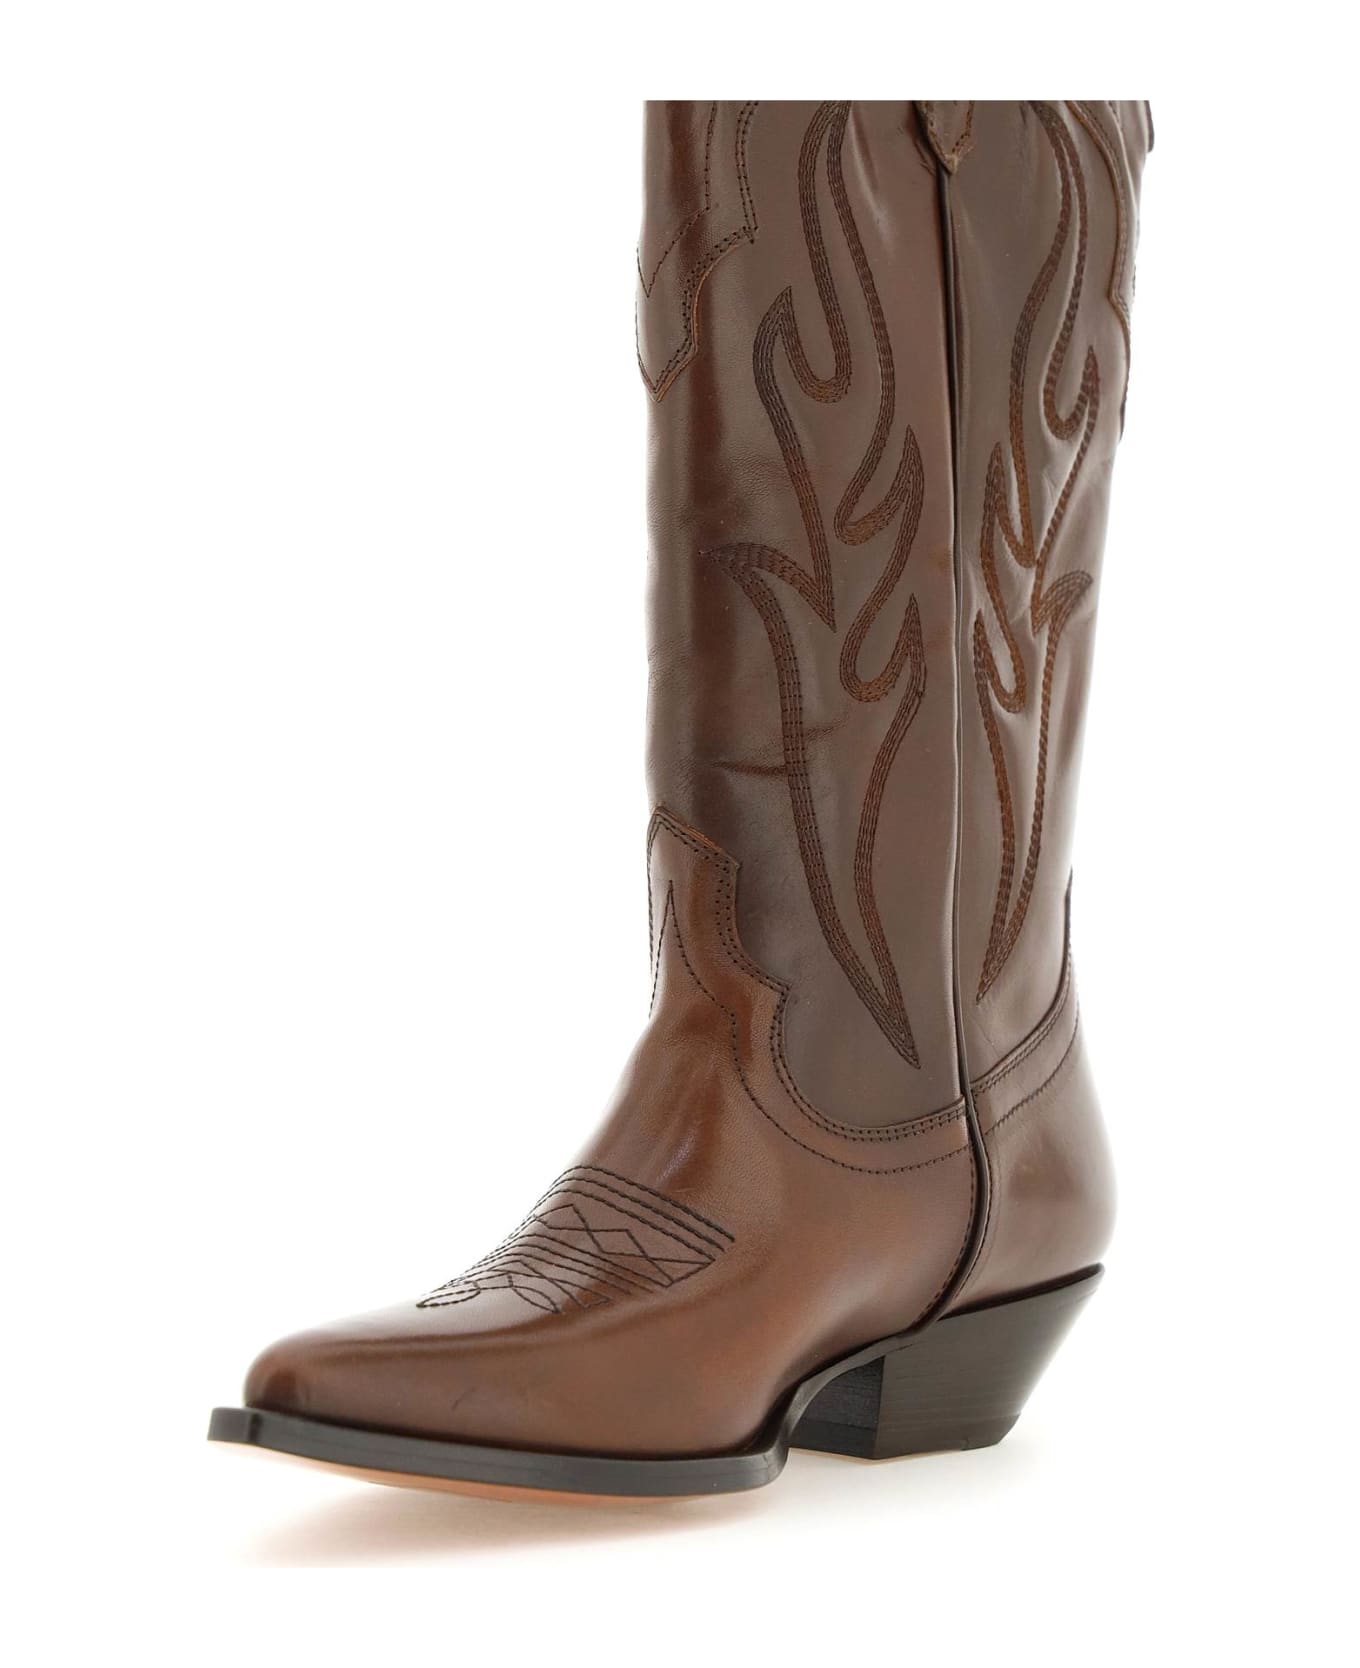 Sonora Brushed Leather Santa Fe Boots - BROWN (Brown)